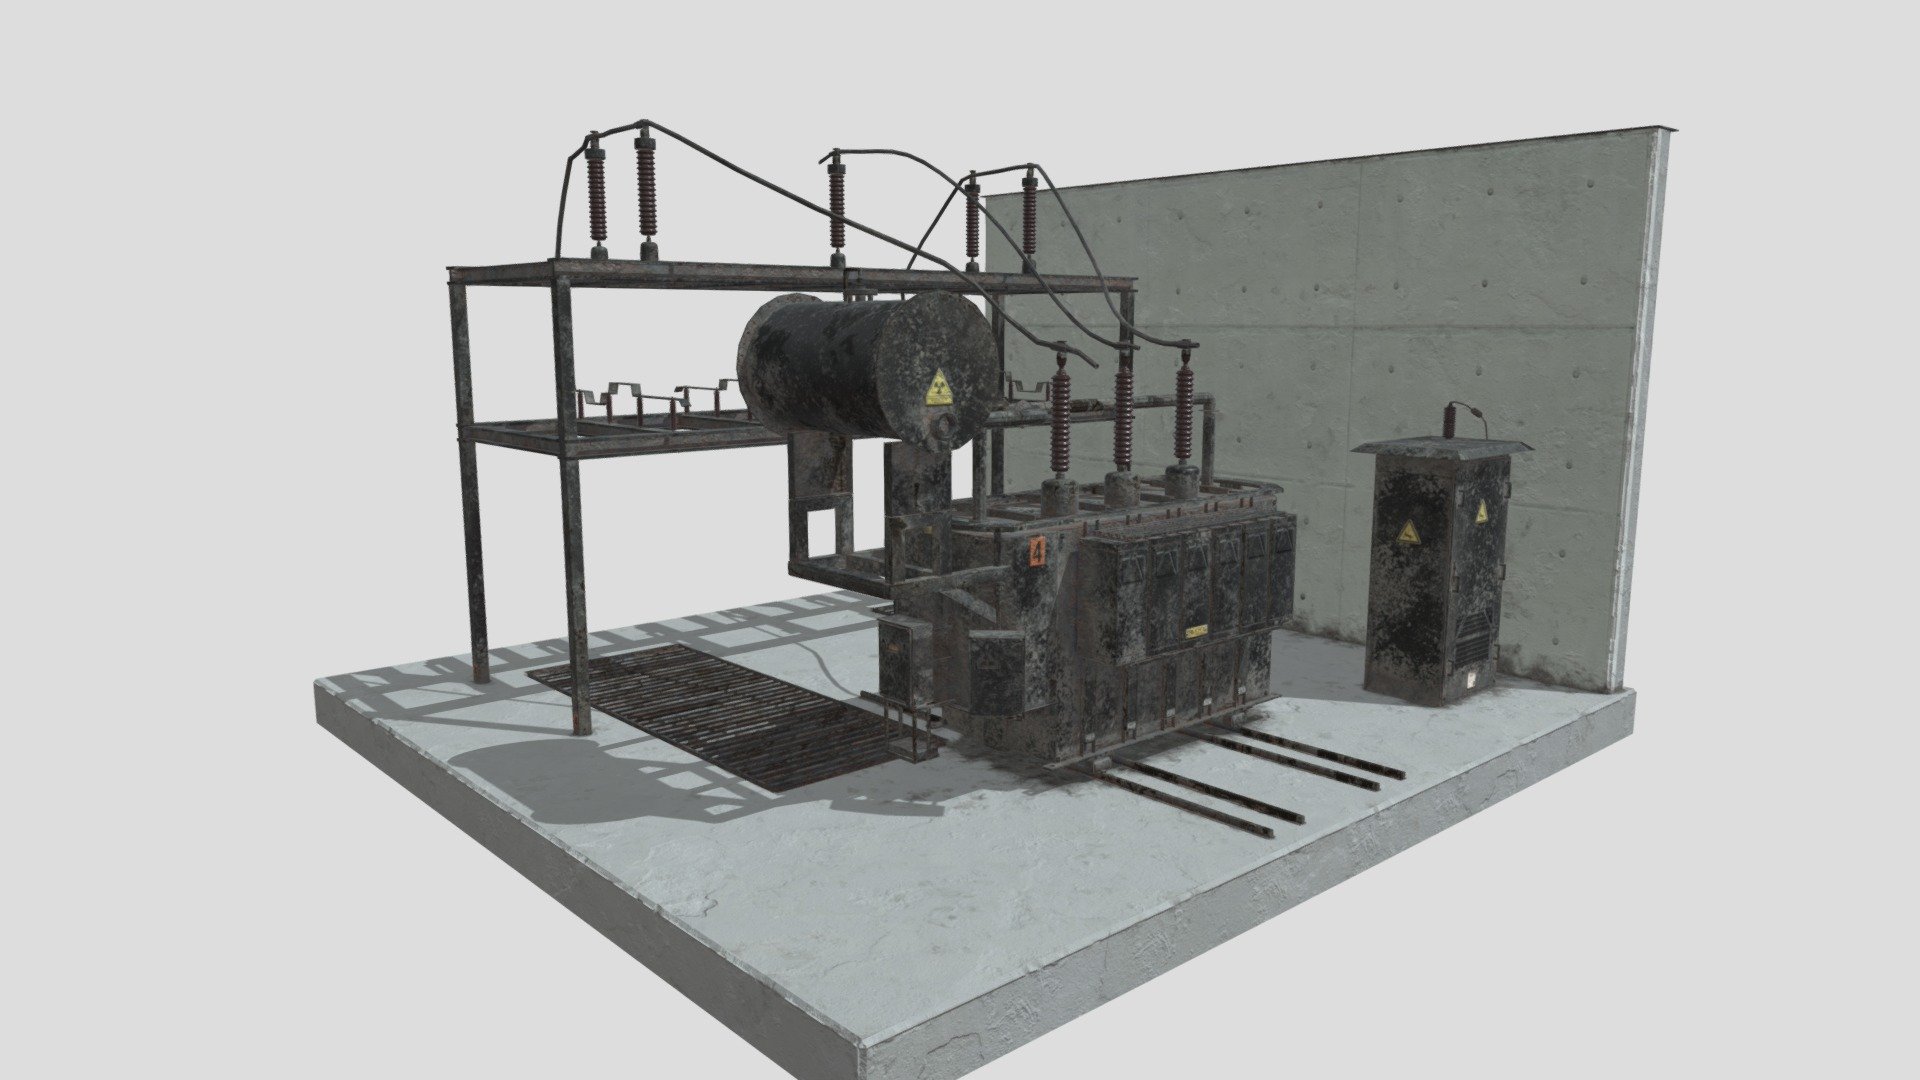 Highly detailed 3d model of&nbsp;electrical power transformer with all textures, shaders and materials. This 3d model is ready to use, just put it into your scene 3d model